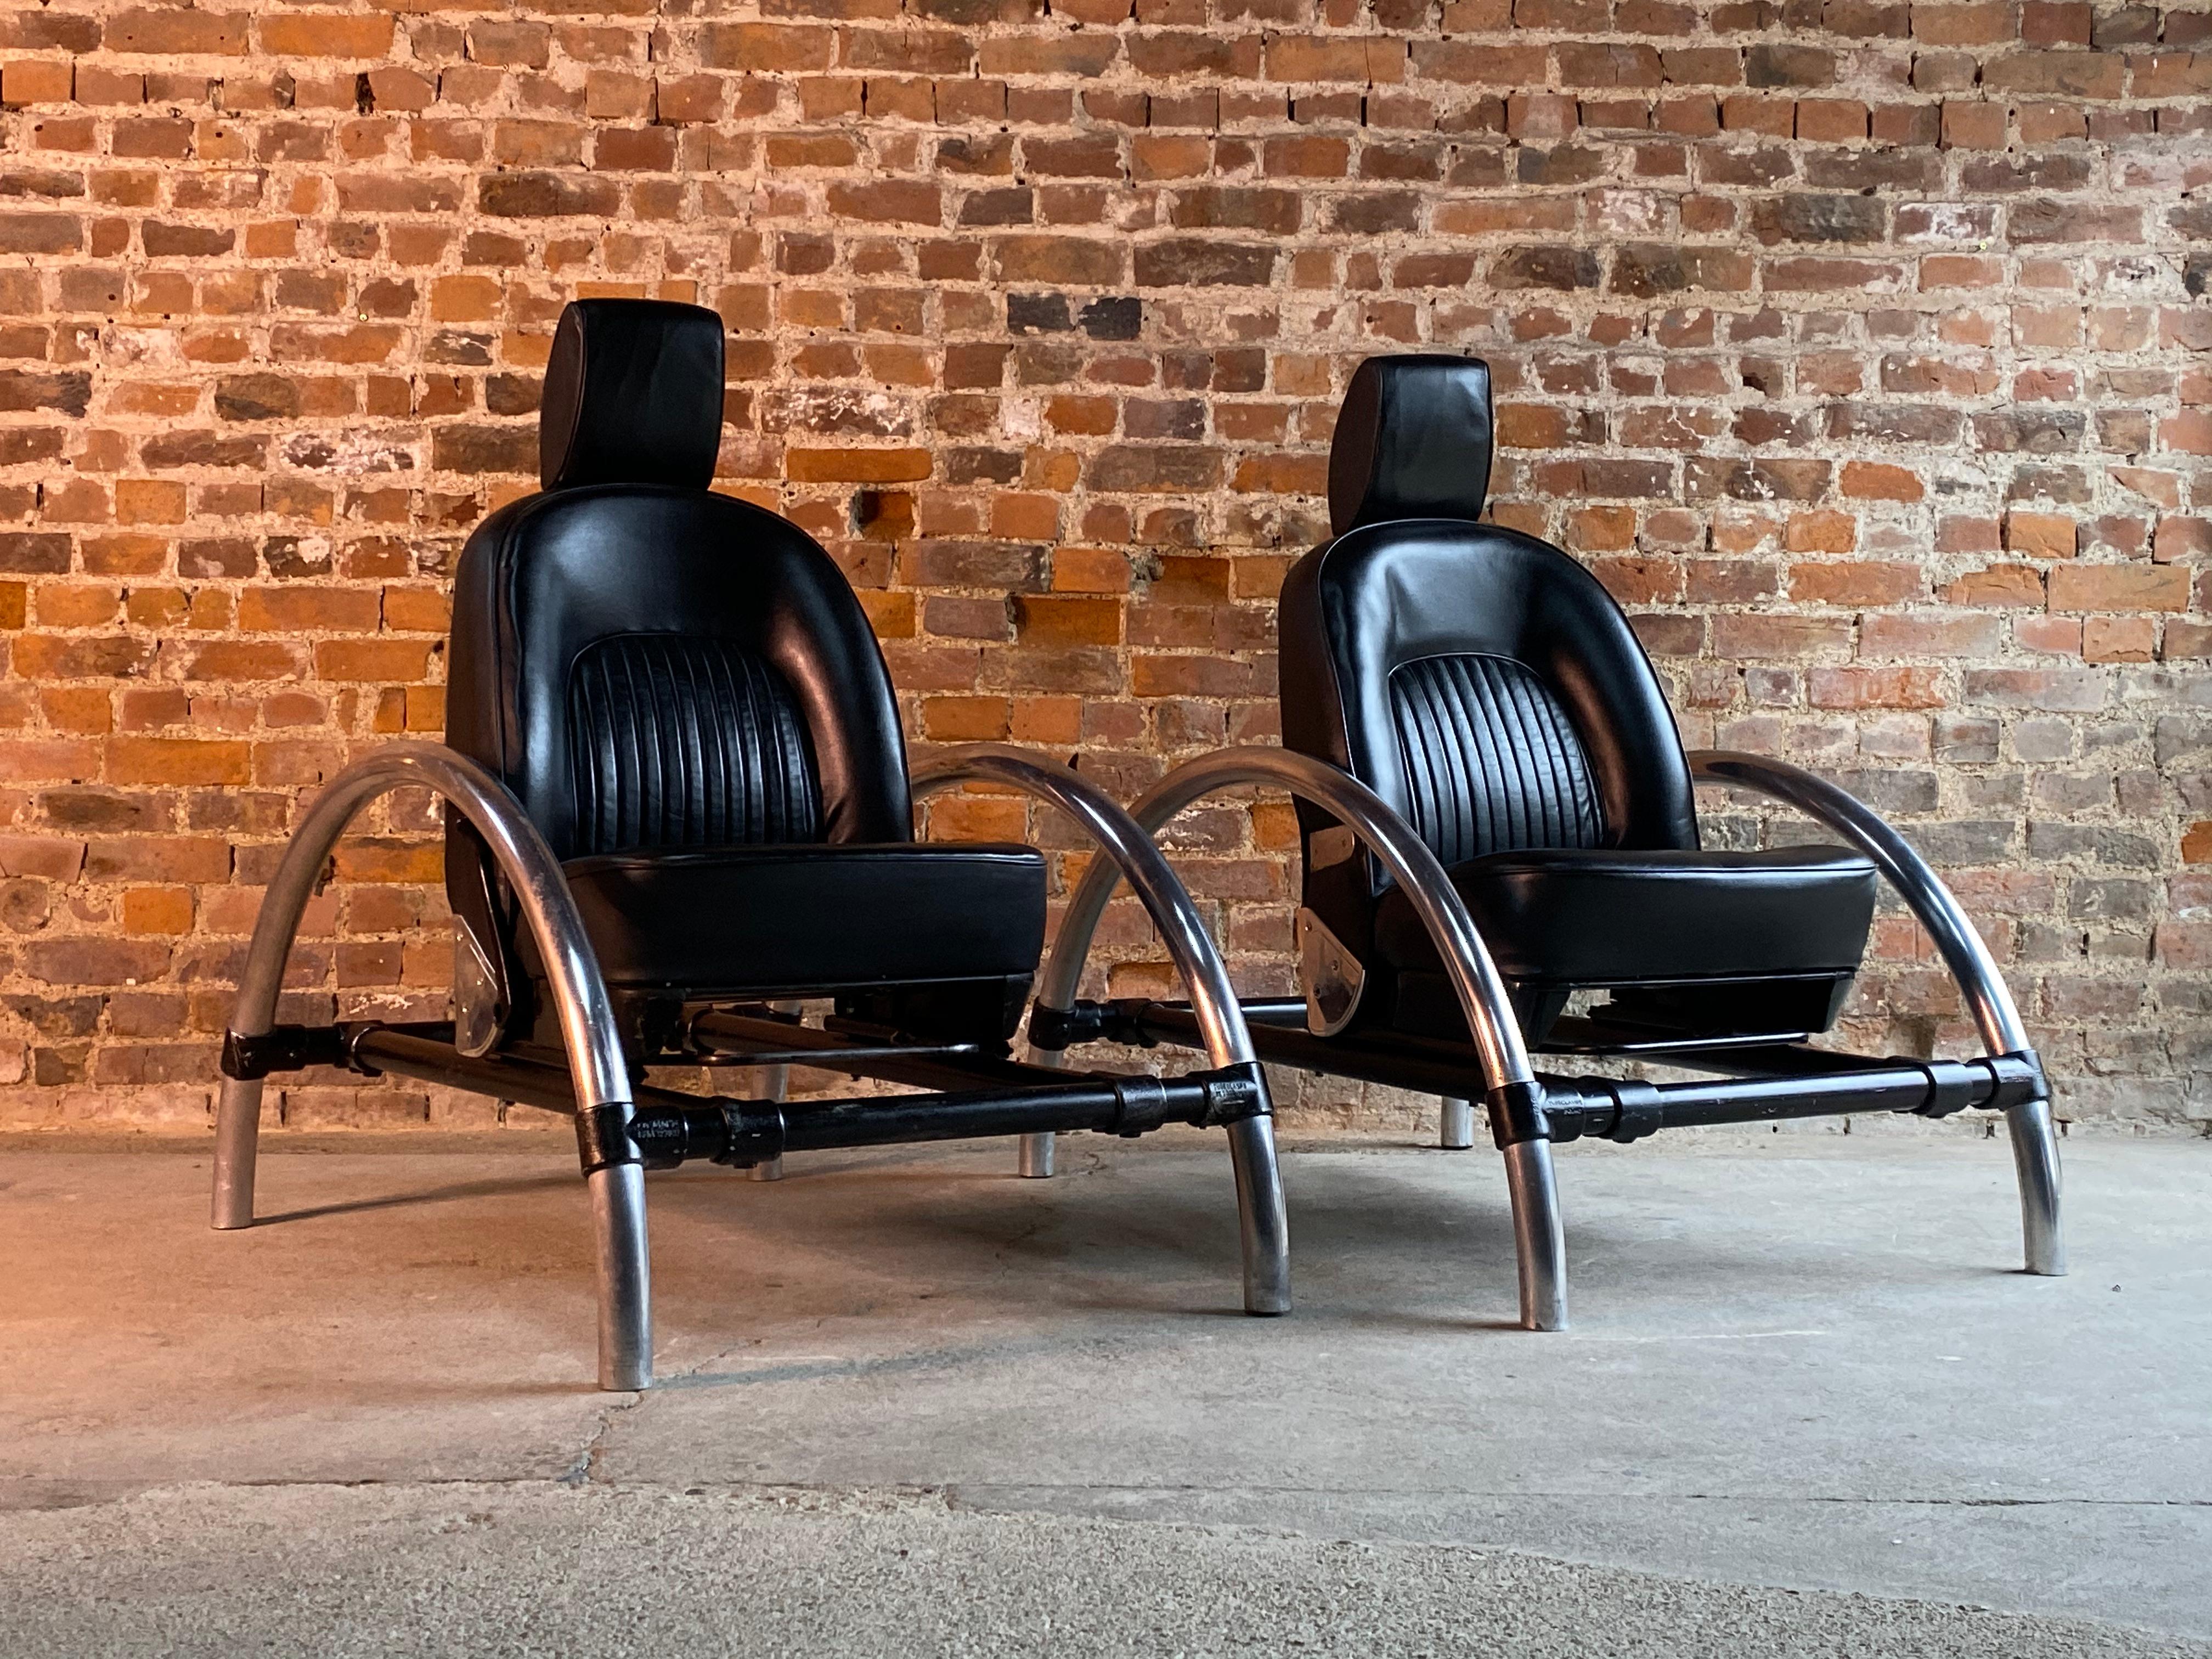 Ron Arad rover chairs pair by One Off Ltd, circa 1981

Fabulous pair of Ron Arad black leather Rover chairs by One Off Limited circa 1981, both chairs finished in black leather with reclining facility and a forward and back action, both chairs come